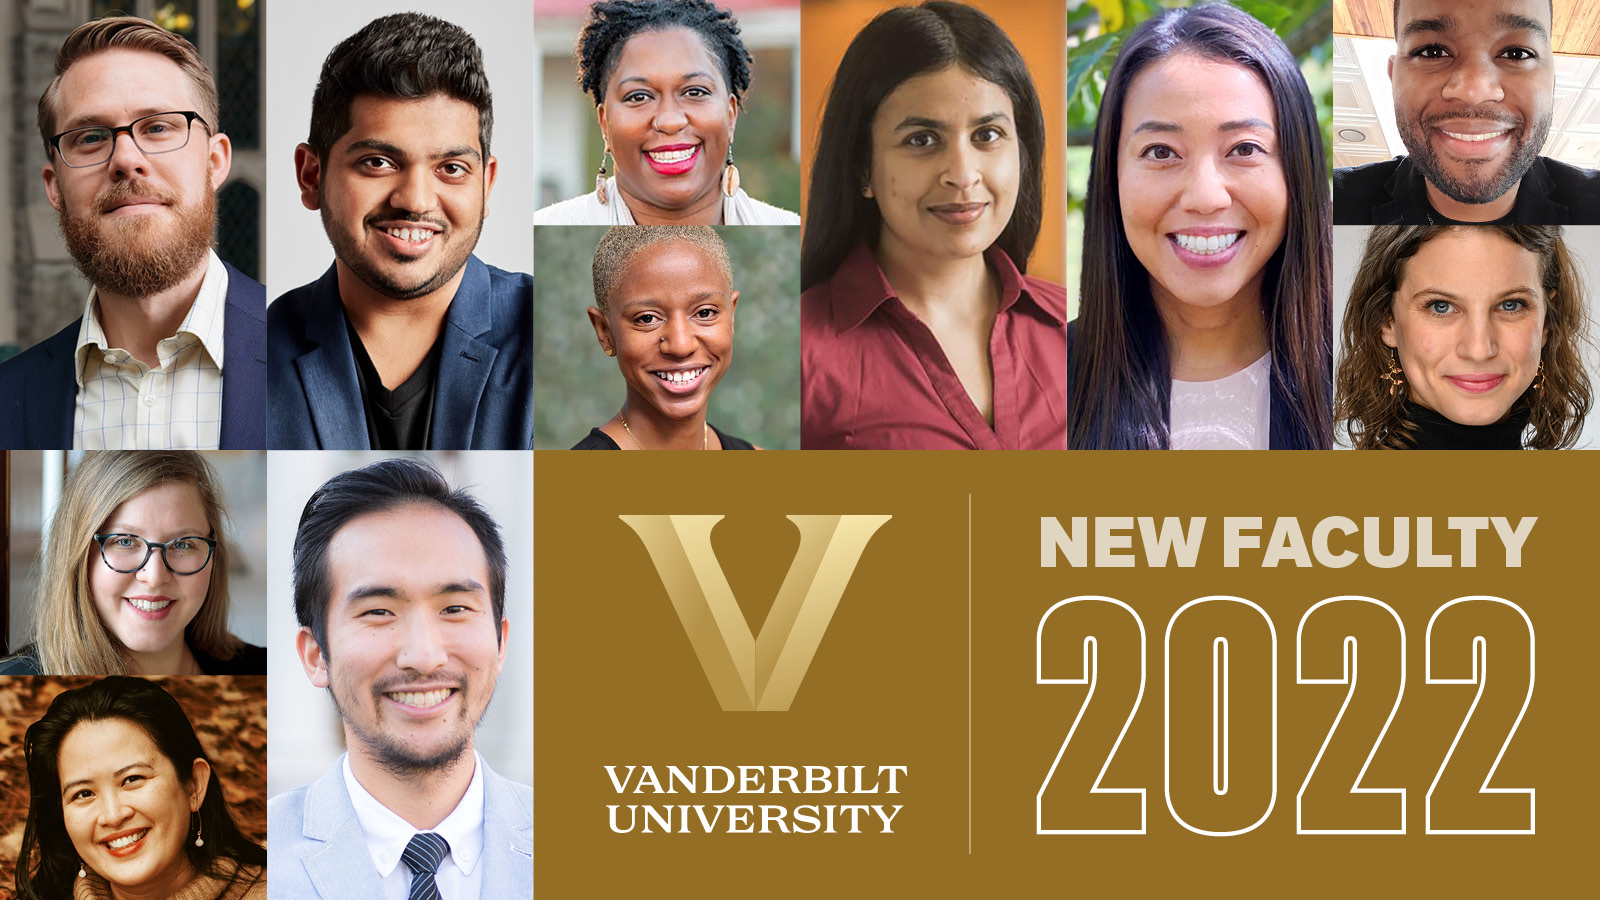 NEW FACULTY: Research around the world—and beyond